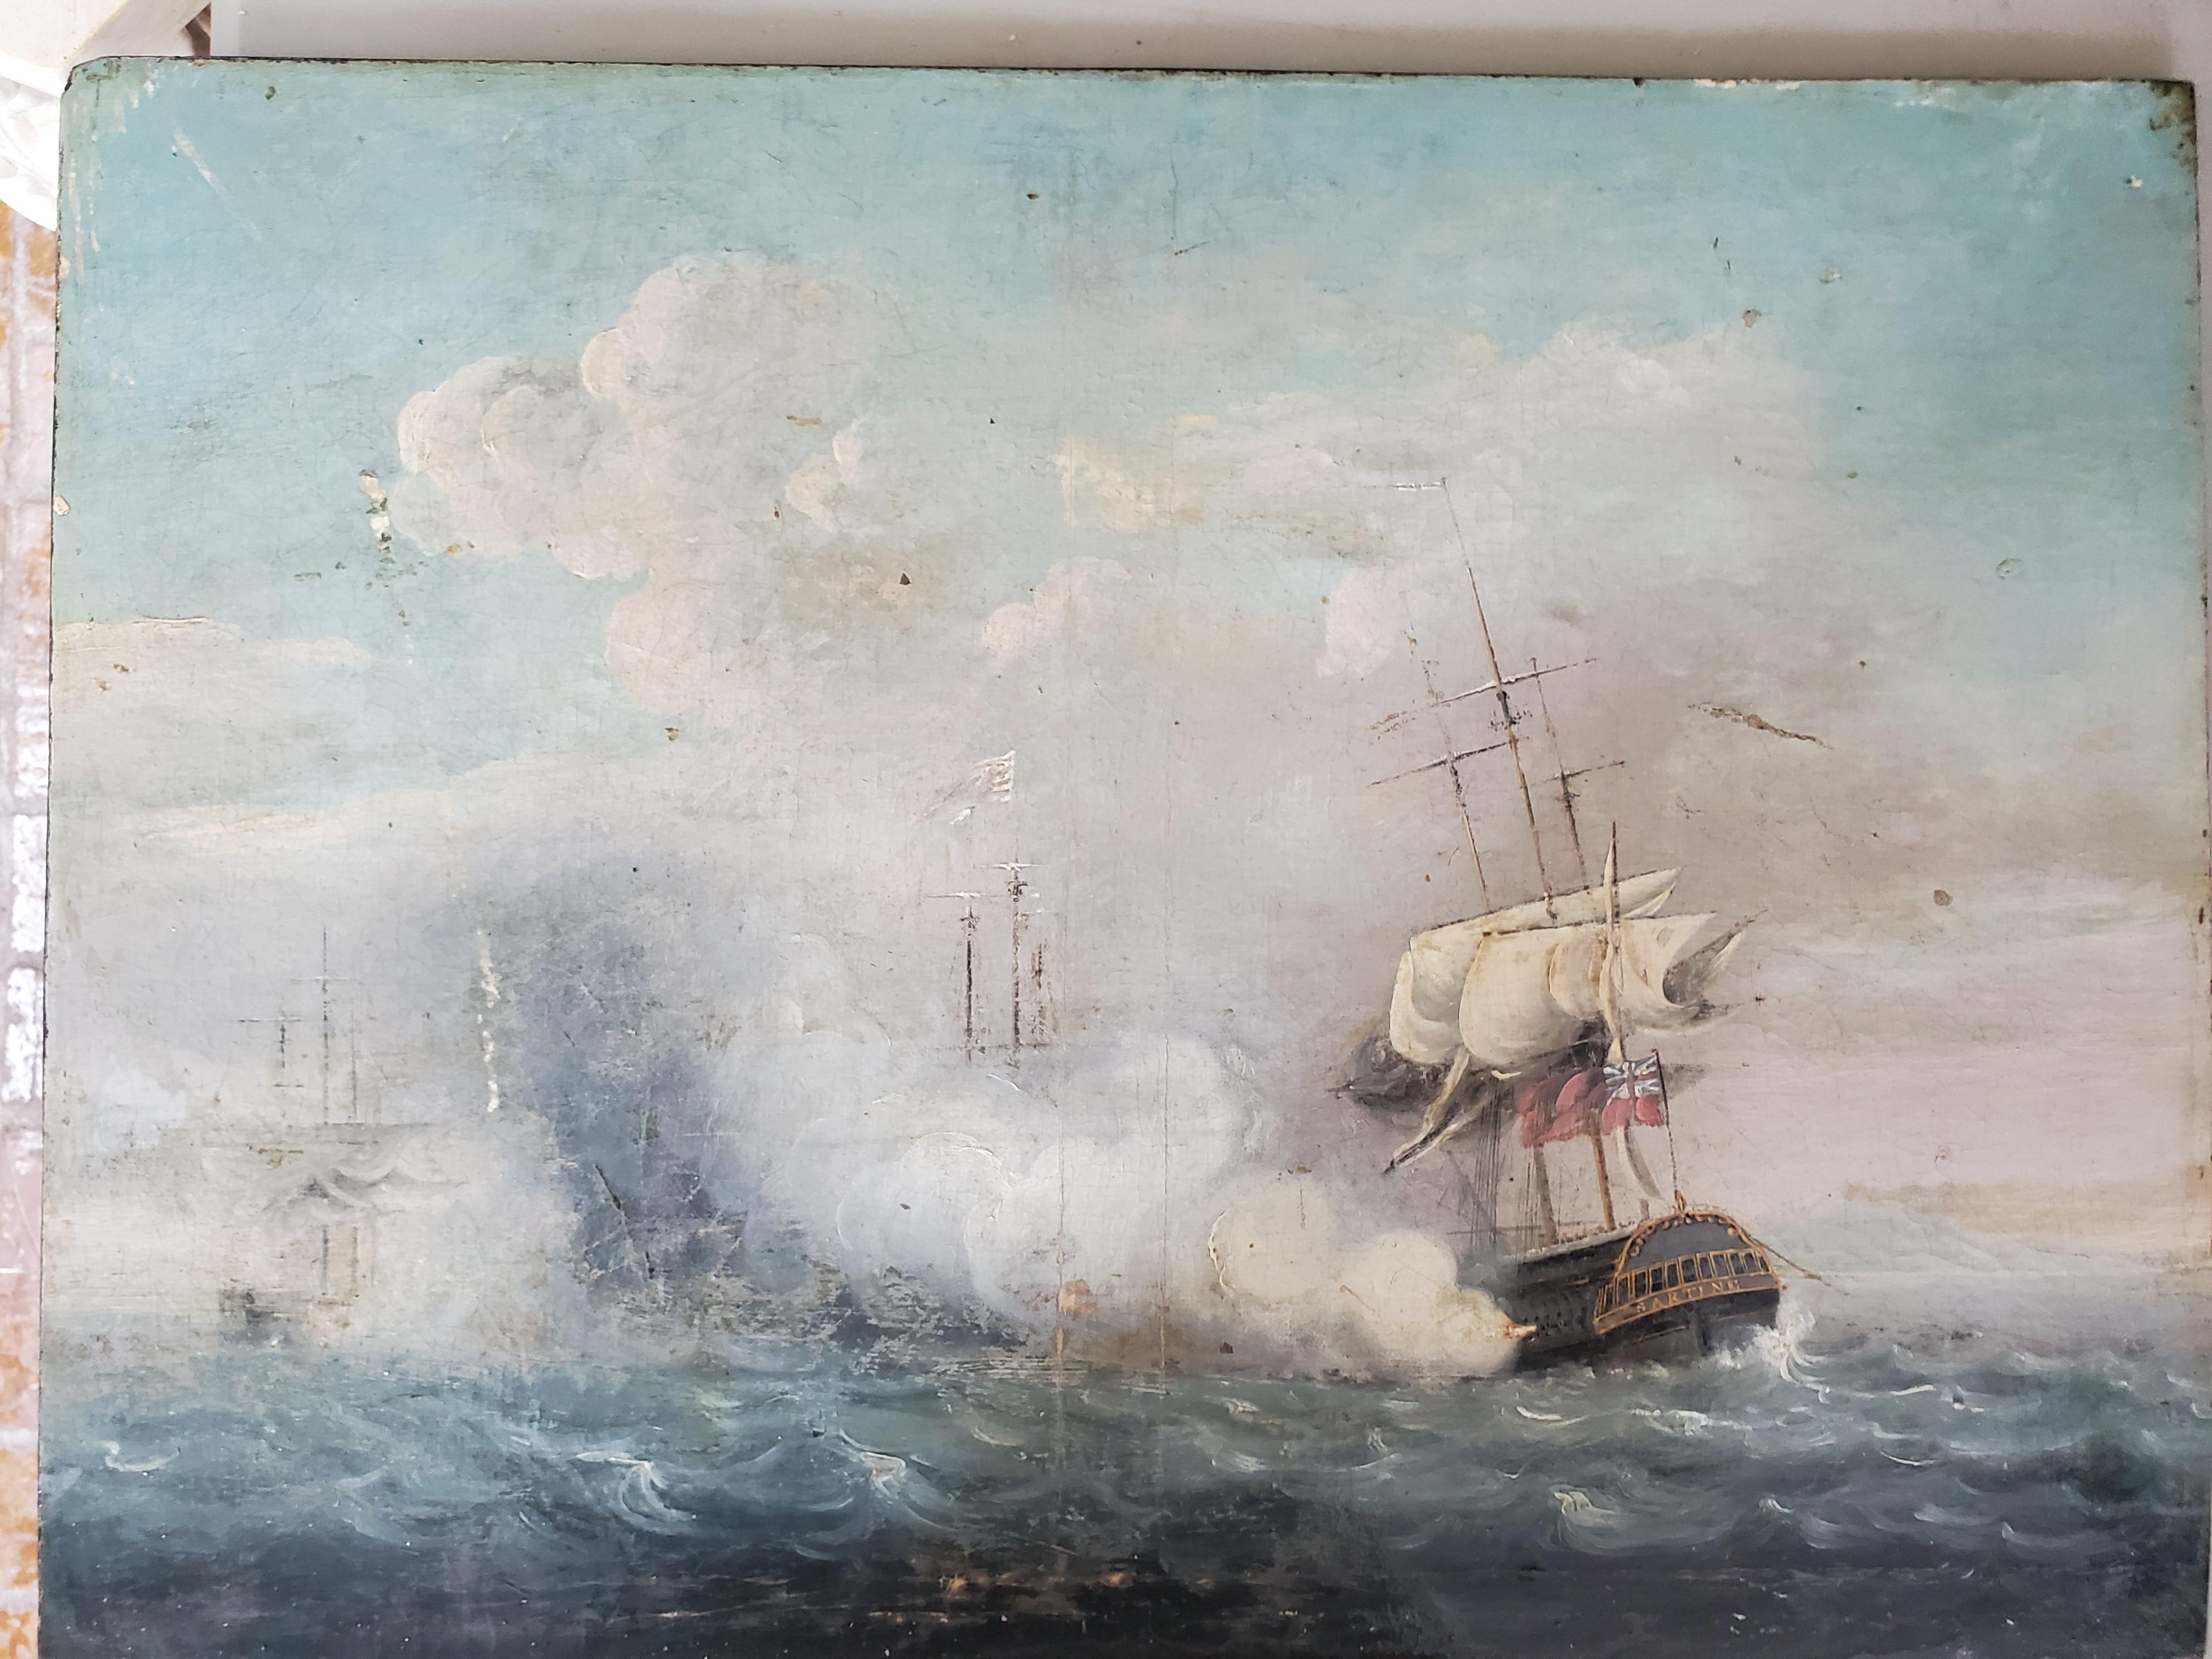 18th c Historical English India Naval Battle Oil Painting by John Thomas Serres In Good Condition For Sale In Savannah, GA